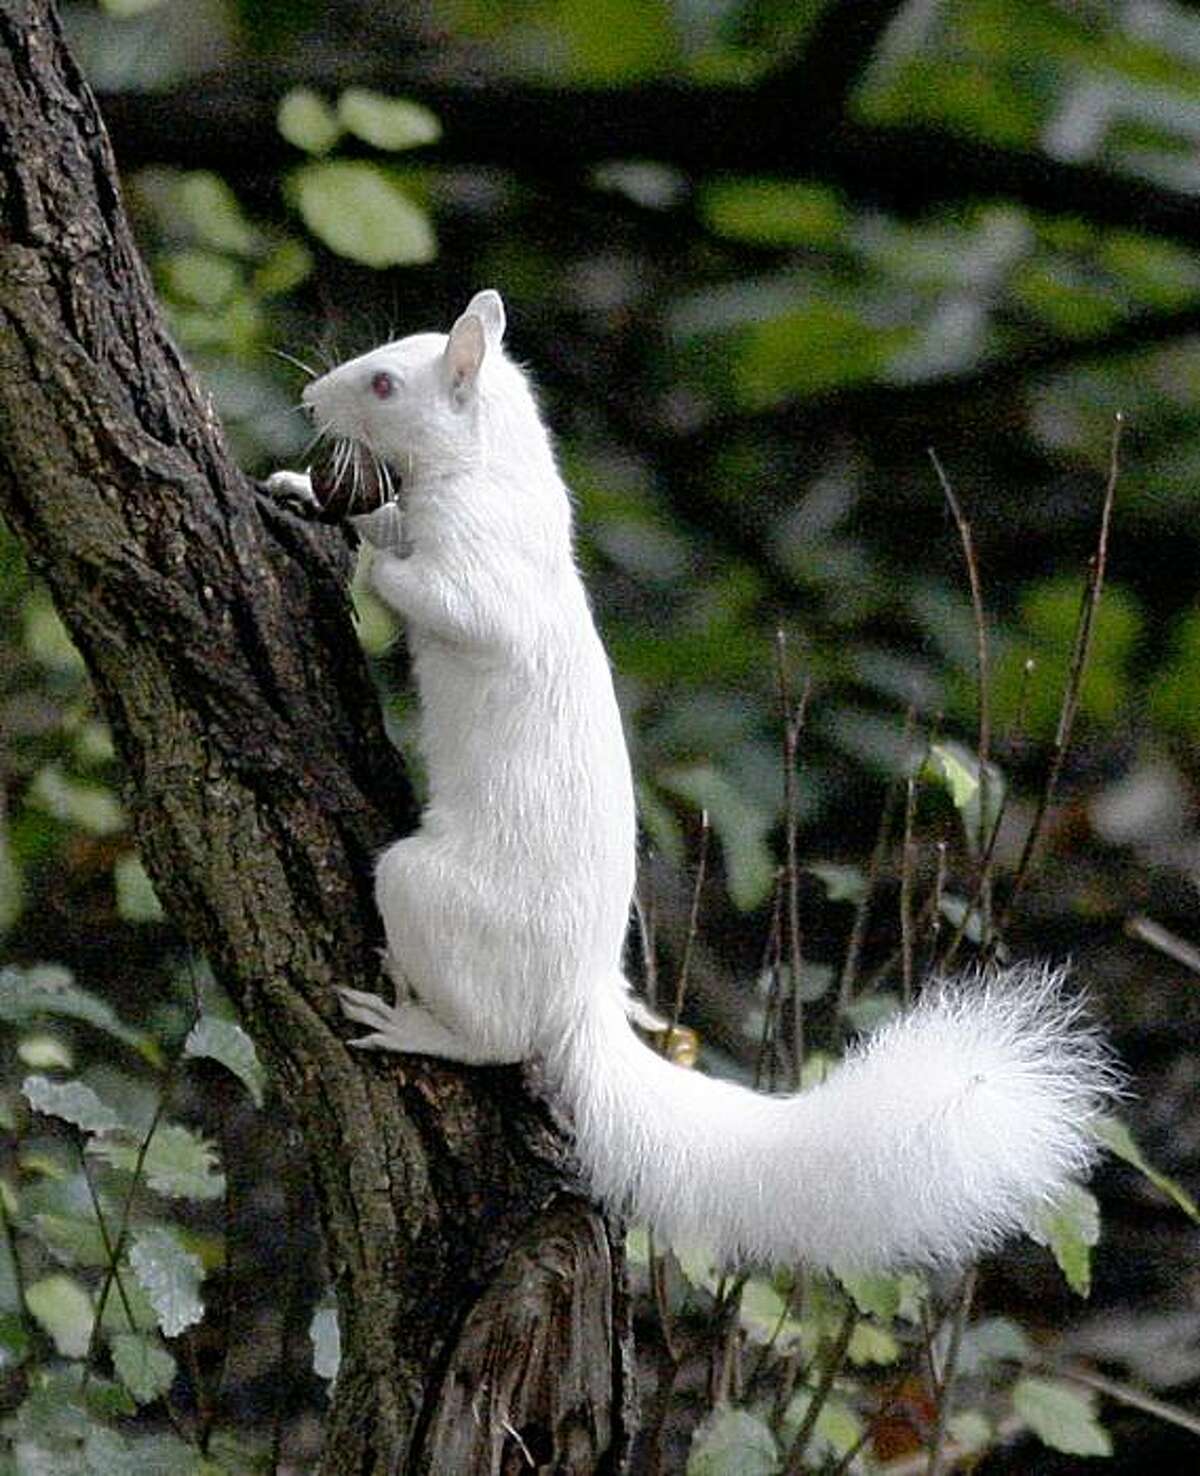 Good luck squirrel: An albino squirrel roams the University of Texas campus. According to UT legend, if a student sees it the day of a test, it will bring good luck.